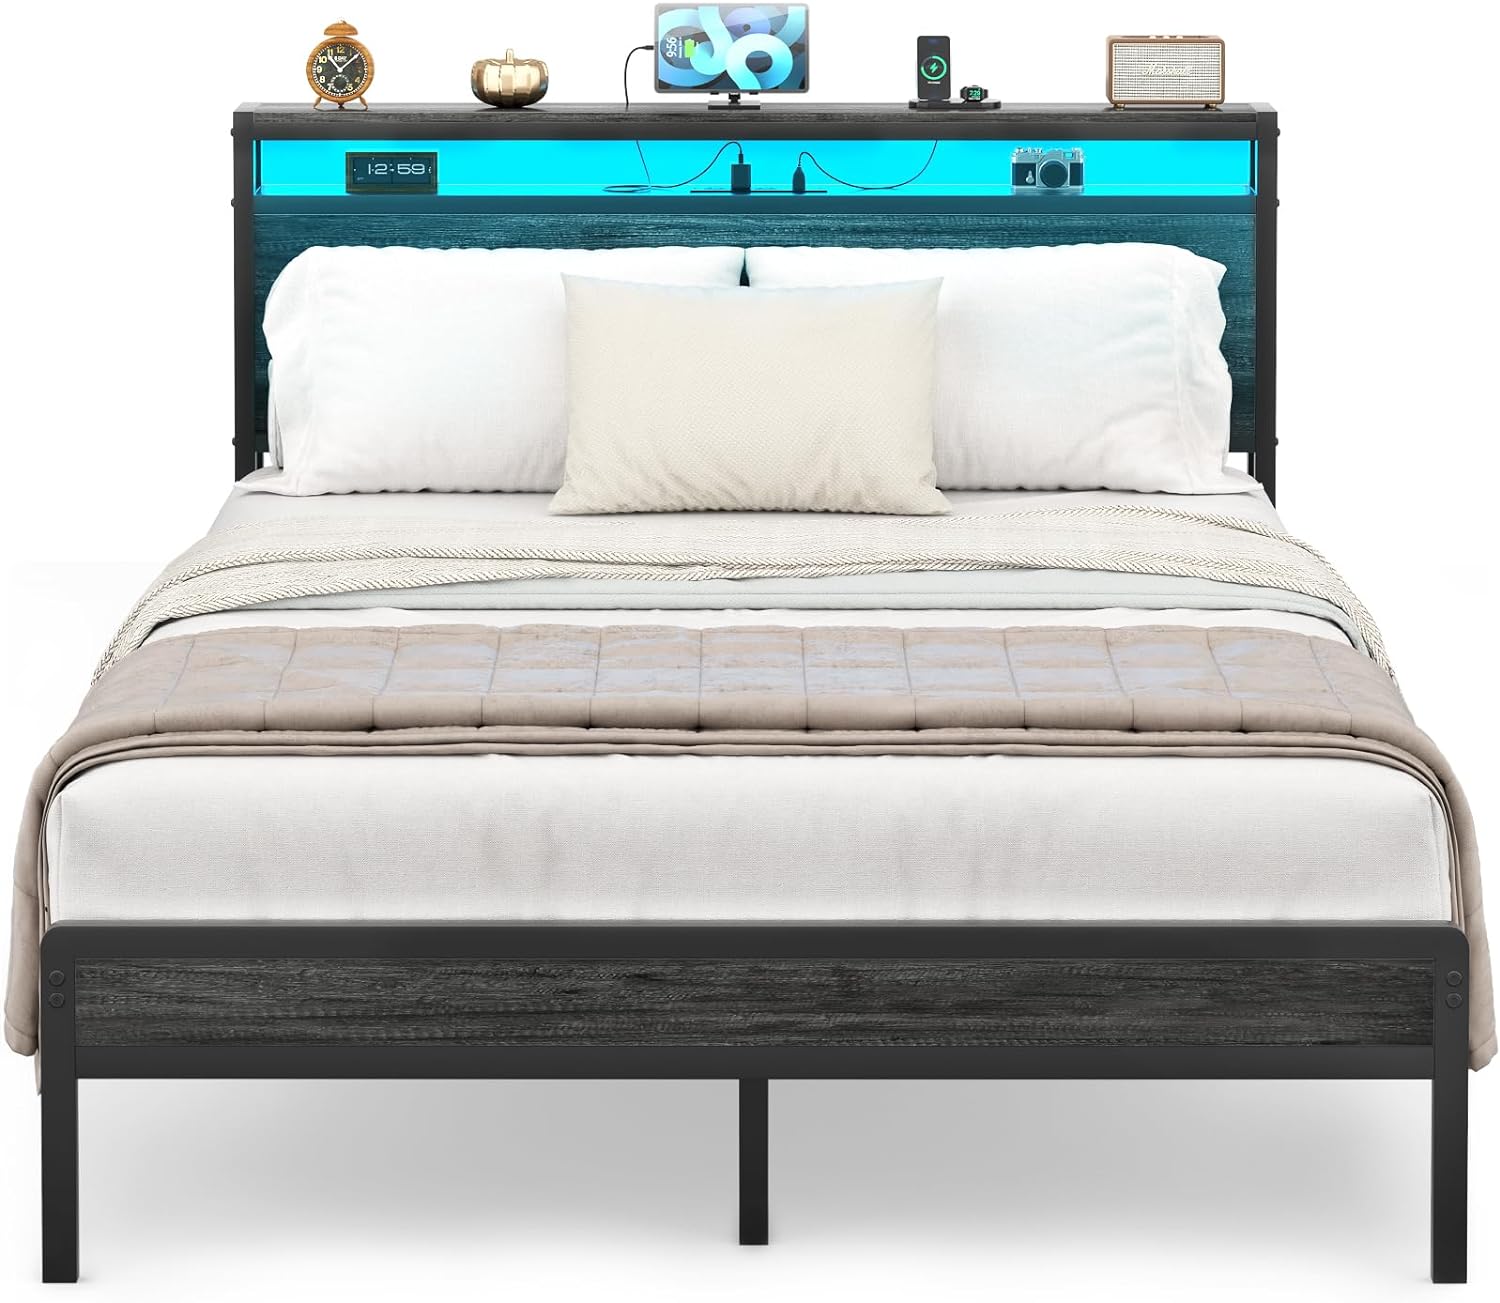 Homieasy Full Size Bed Frame with Charging Station and Led Lights, Industrial Metal Platform Bed with Storage Headboard, Steel Slat Support, No Box Spring Needed, Noise-Free, Black Oak